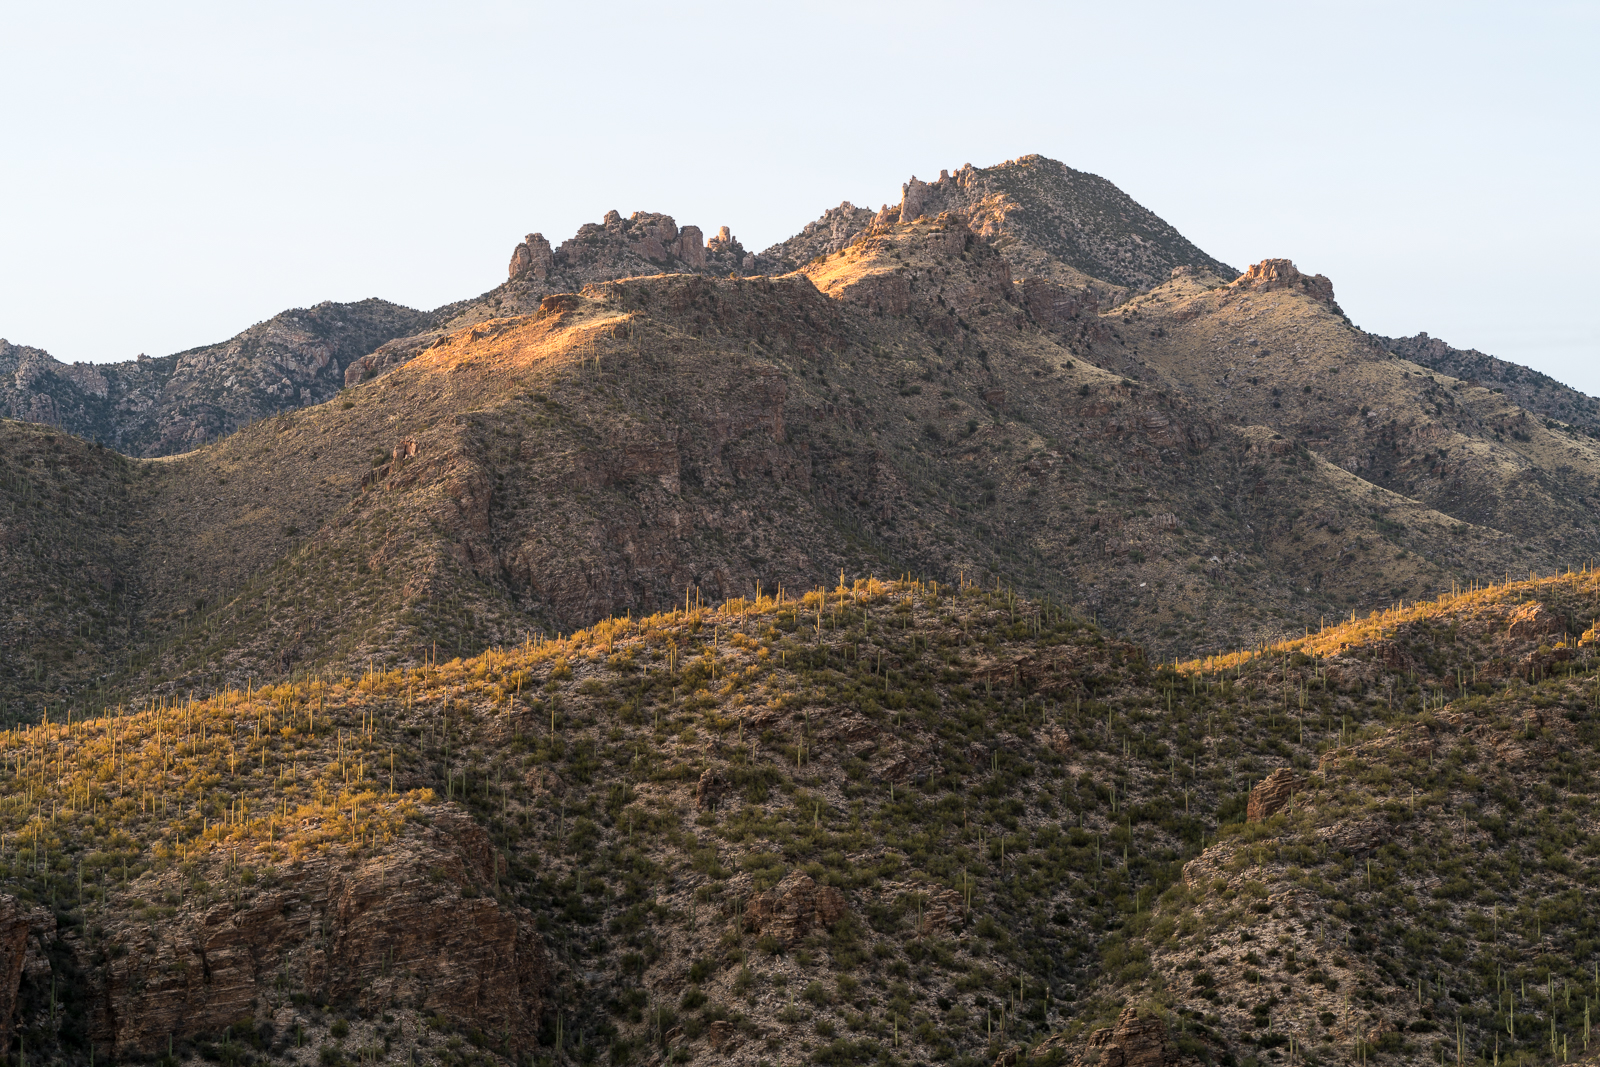 End of the day near the Phoneline Trail looking towards Rattlesnake Peak. March 2016.